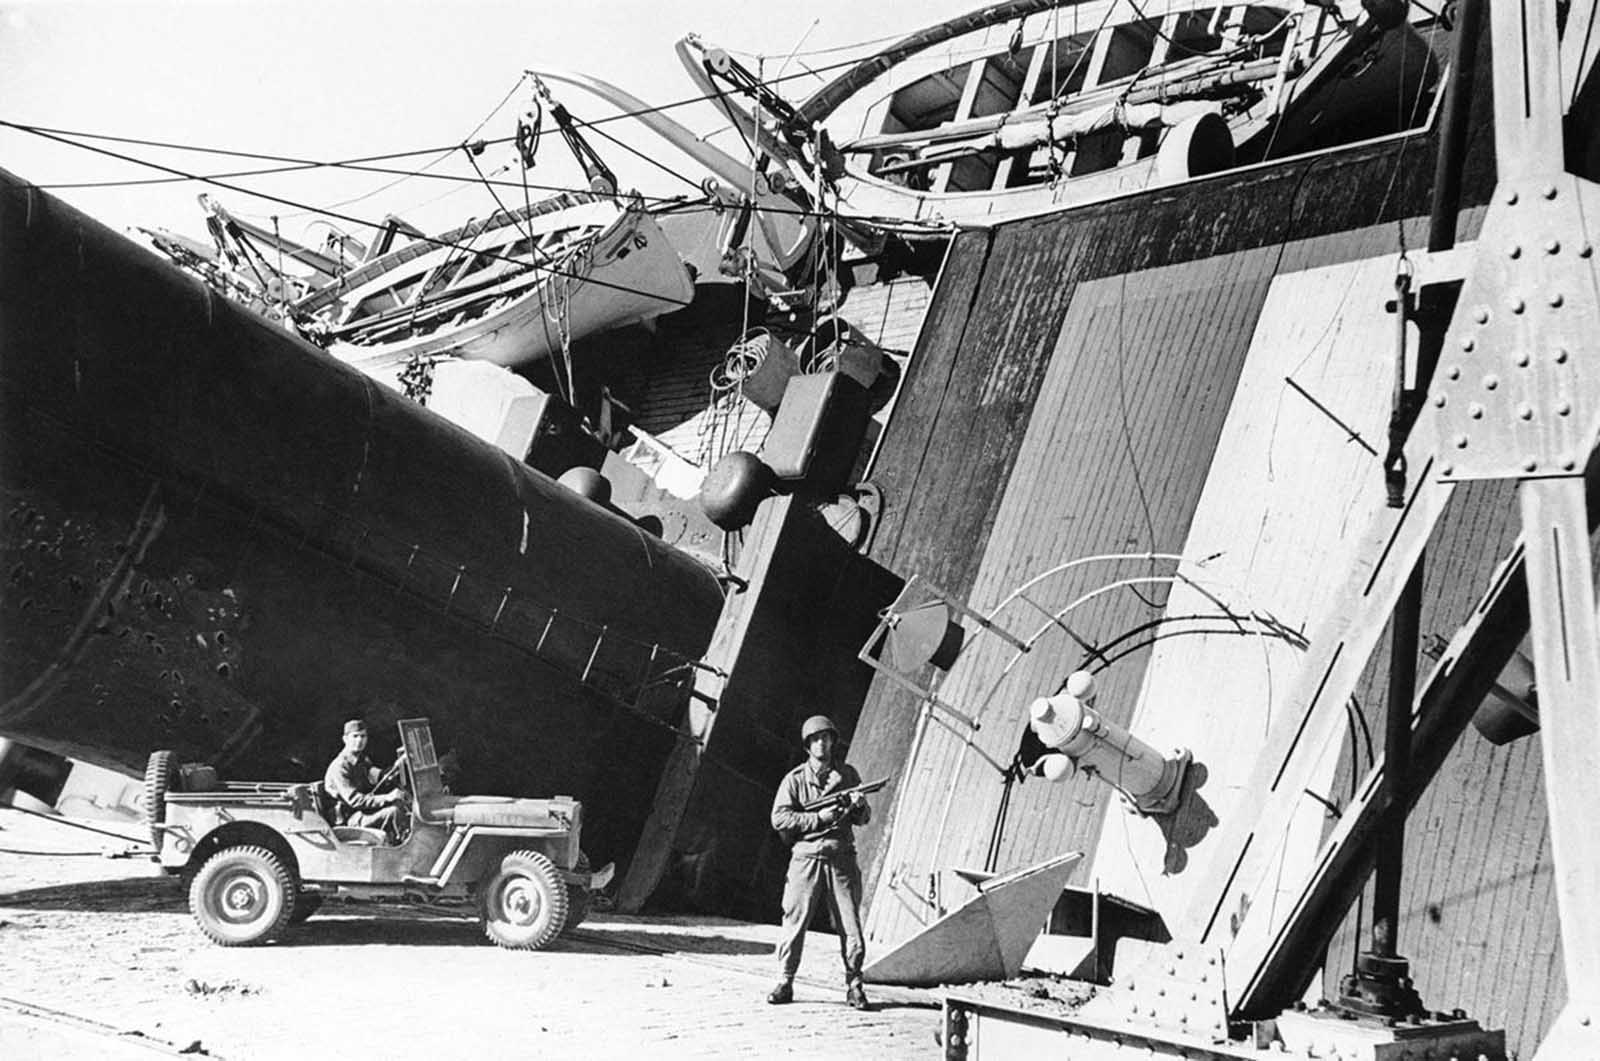 A U.S. army soldier with a sub-machine gun and another in a jeep guard the looming S. S. Partos which was damaged and had capsized against the dock when the Allies landed at the North African port, in 1942.